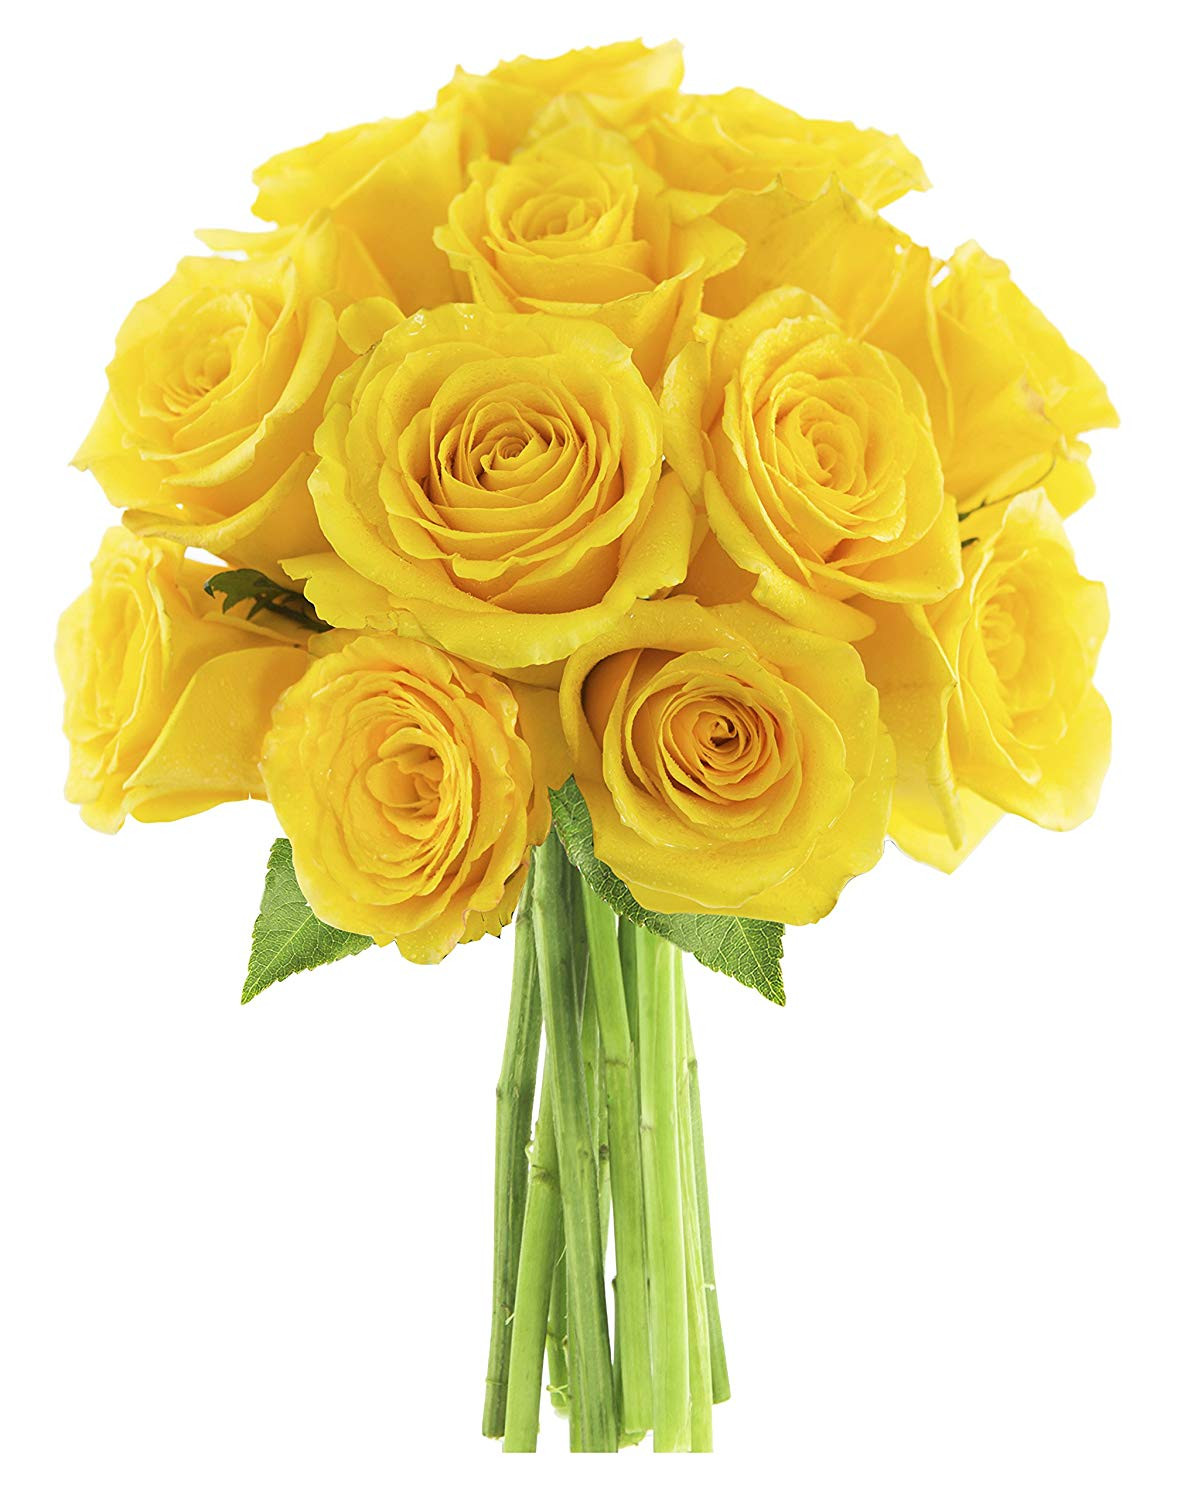 28 Unique Proflowers 19.99 Free Vase 2024 free download proflowers 19 99 free vase of best more home garden deals and more home garden for sale inside kabloom one dozen you had me at hello yellow roses without vase 2 5 pound